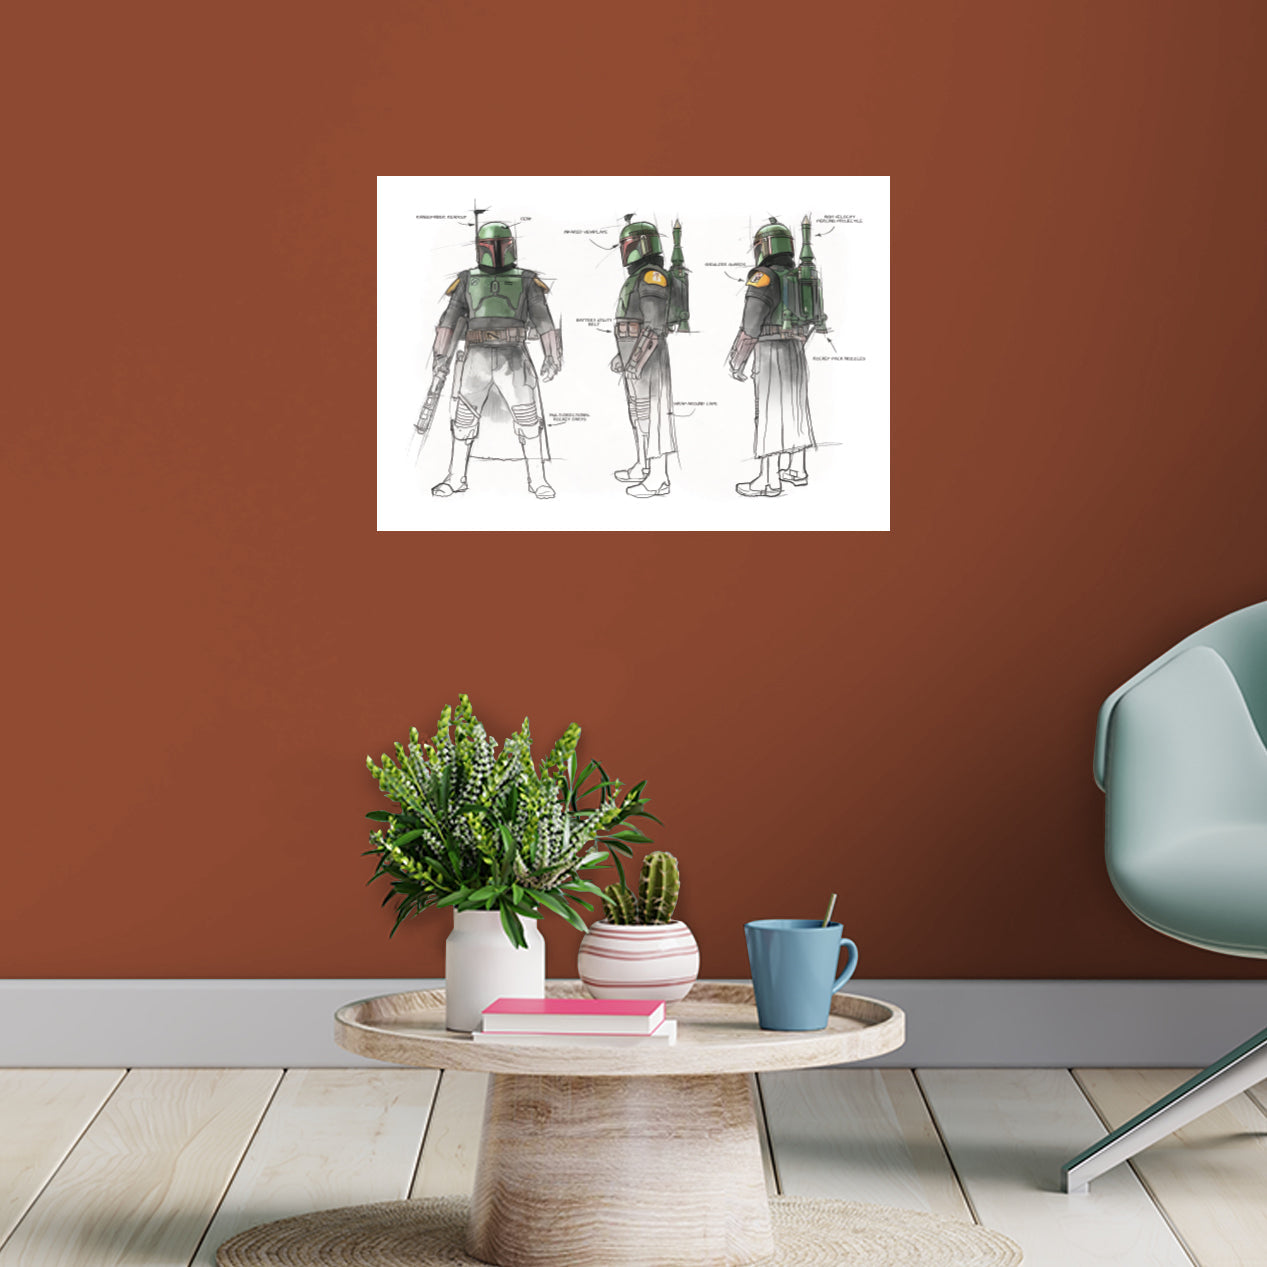 Book of Boba Fett: Boba Fett Character Turnaround Industrial Design Poster - Officially Licensed Star Wars Removable Adhesive Decal